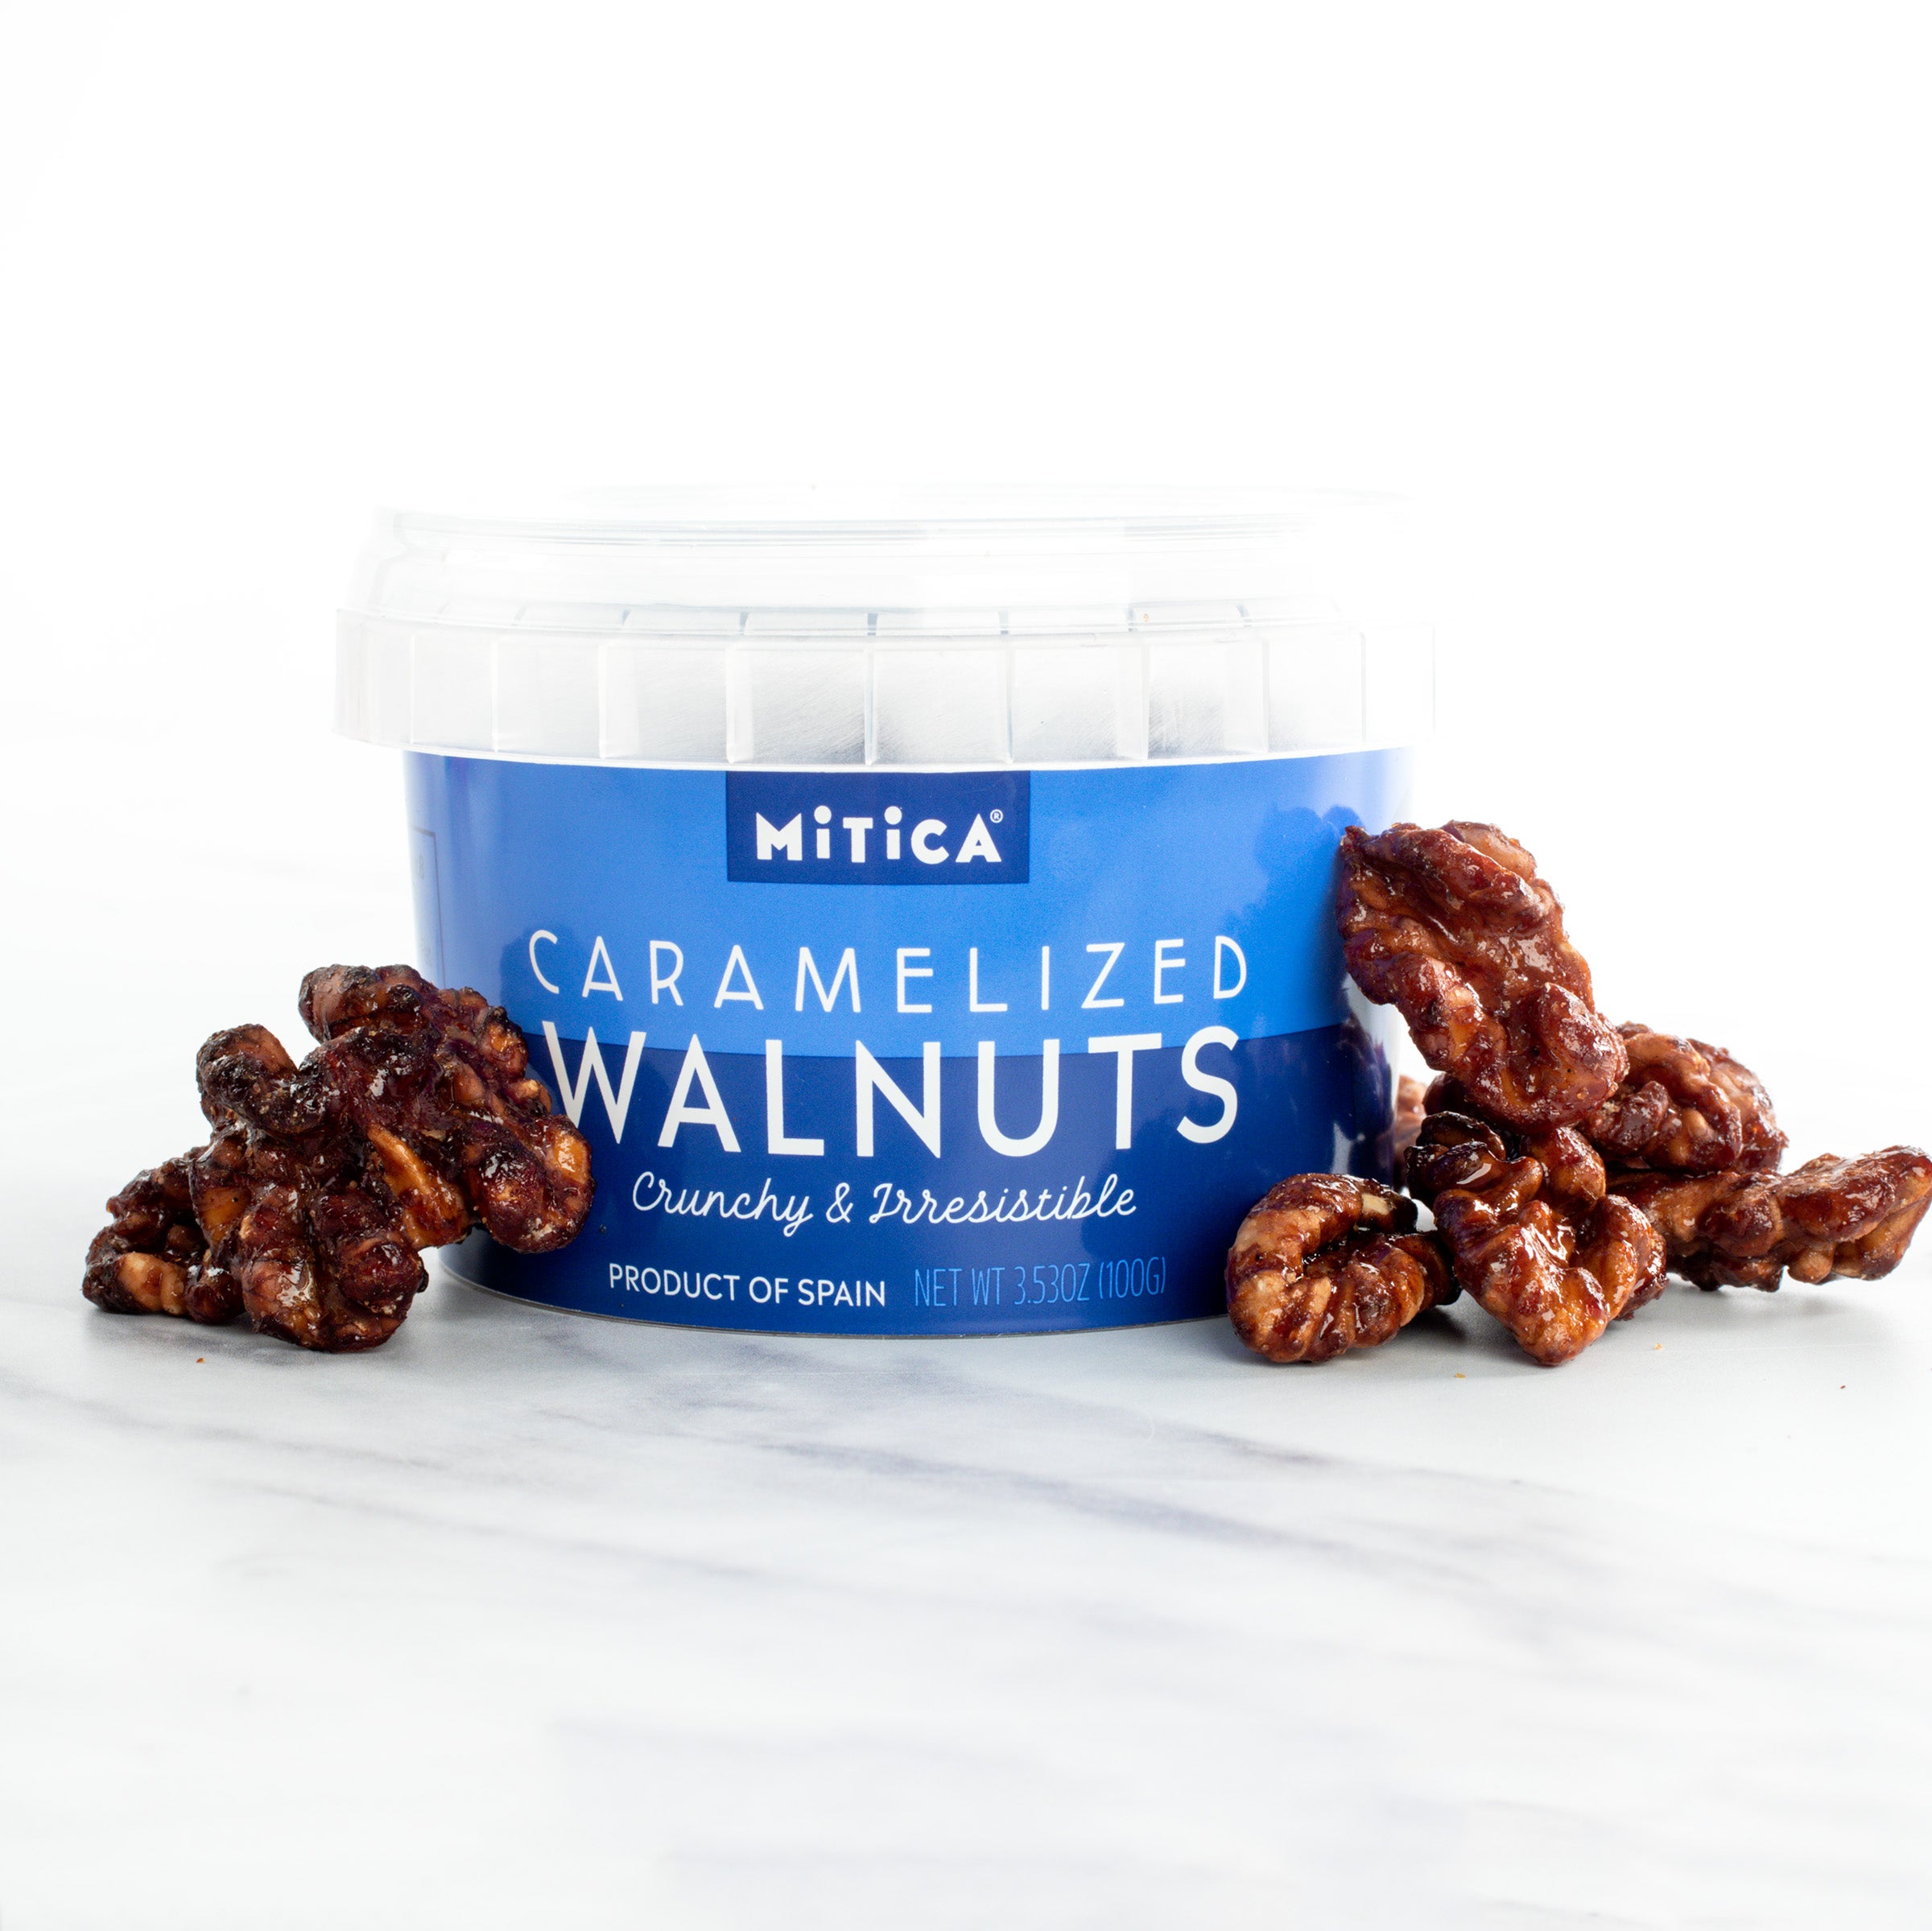 igourmet_6019_Caramelized Walnuts from Spain_Mitica_Dried Fruits, Nuts & Seeds